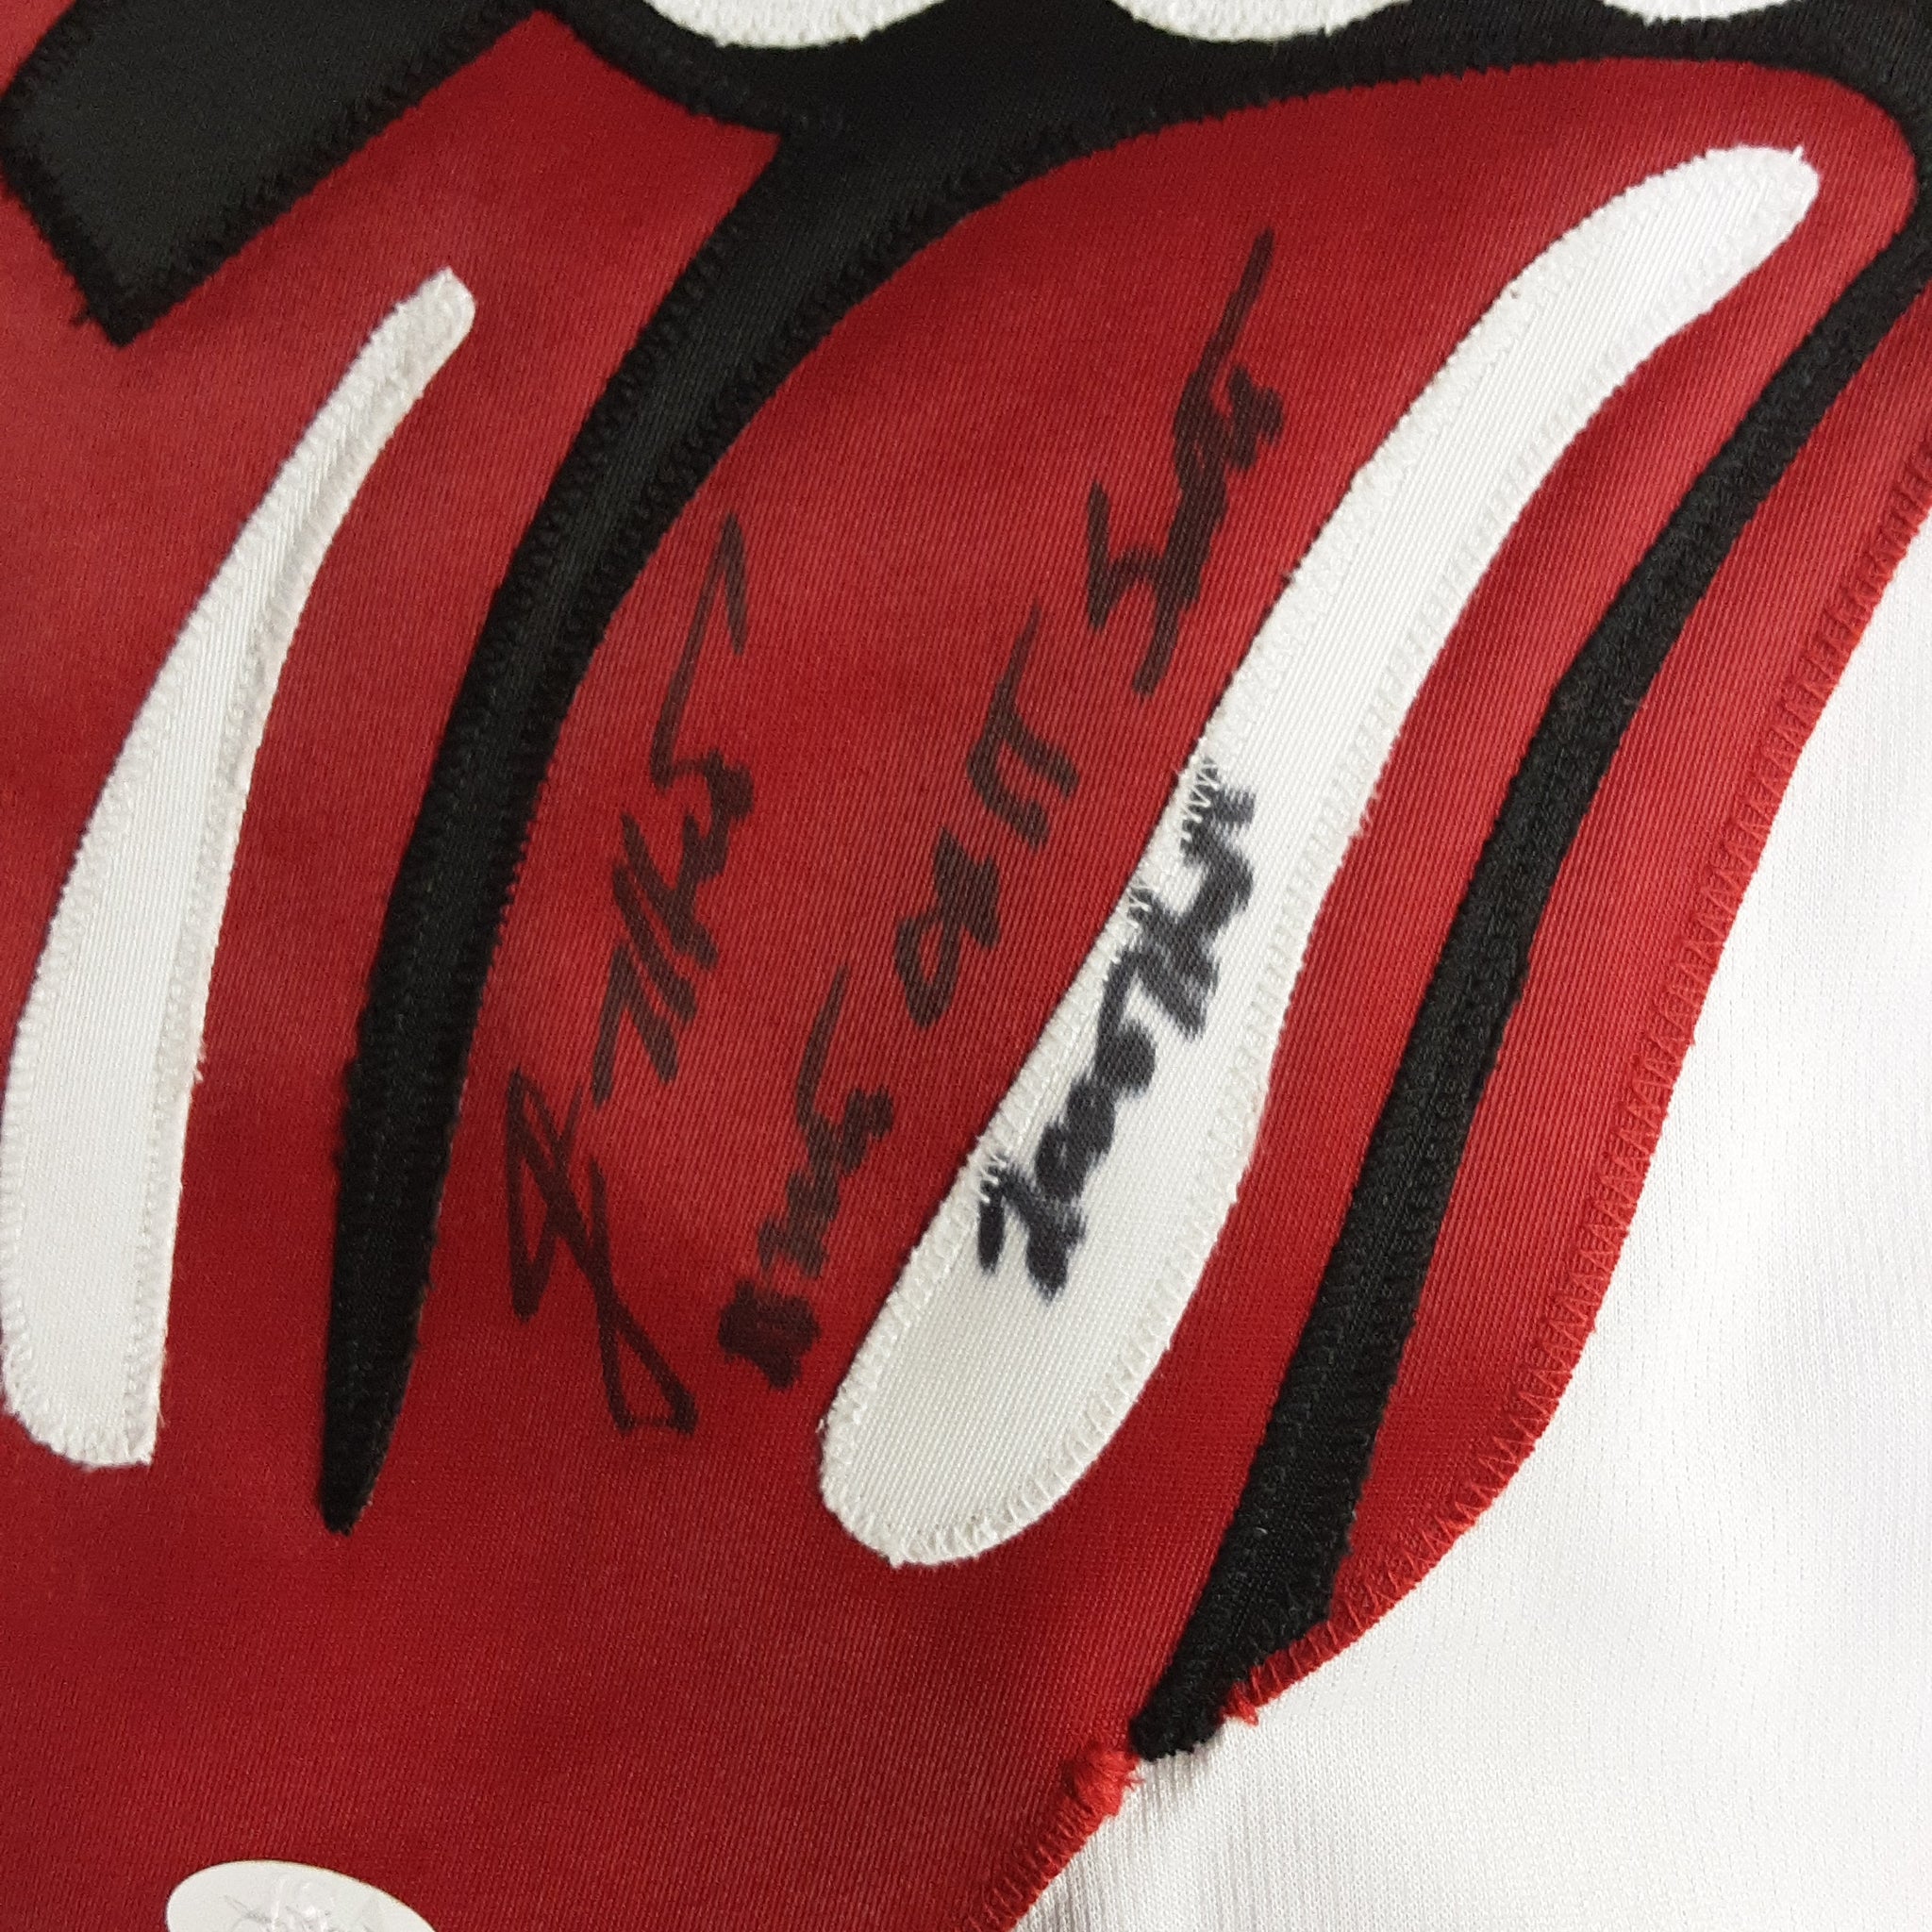 Jimmy Hart Authentic Autographed Signed with Inscription Jersey JSA